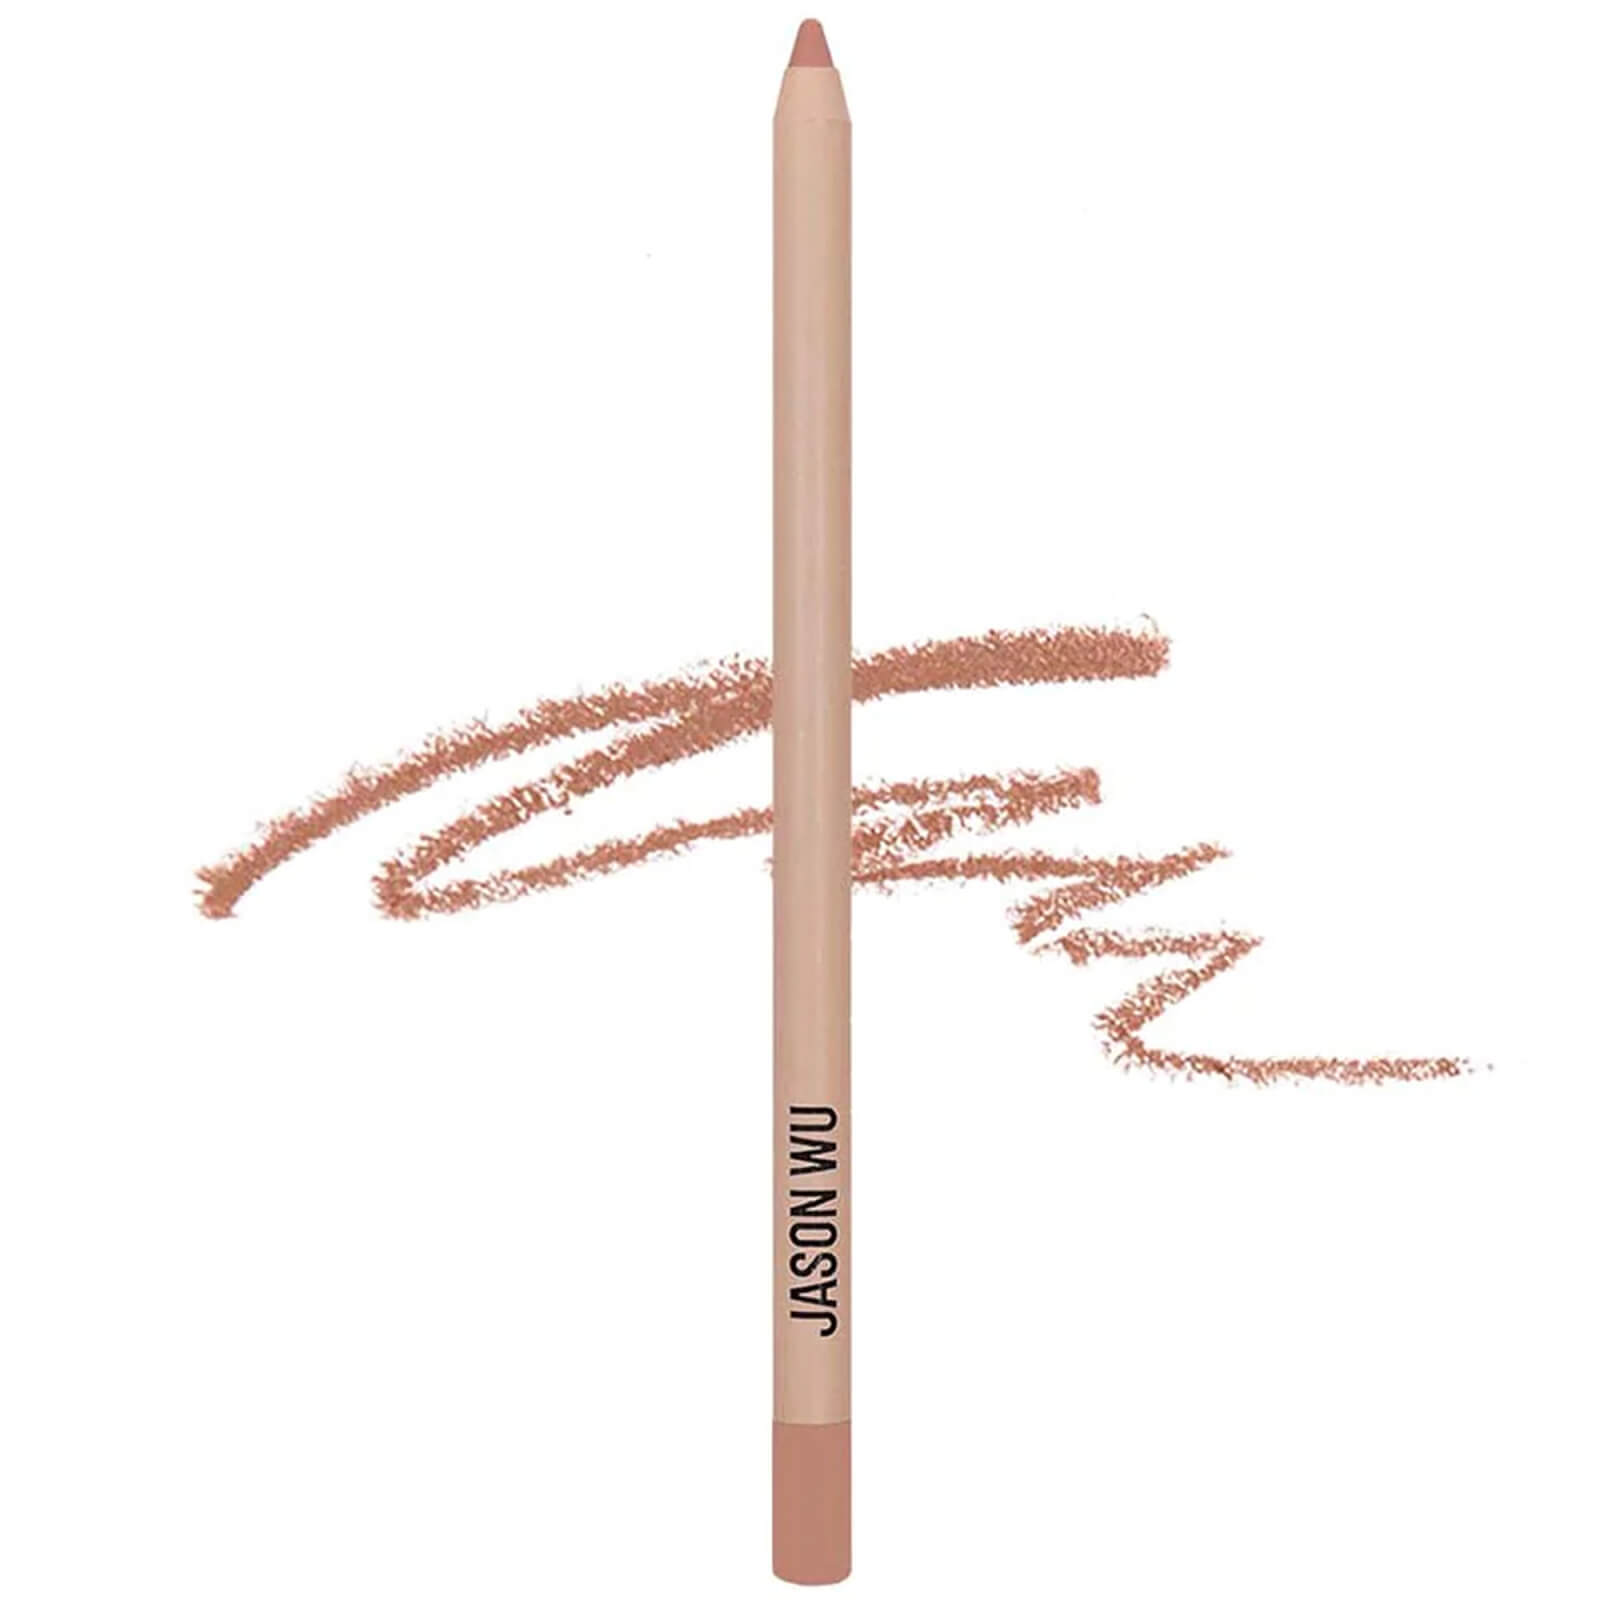 Jason Wu Beauty Stay In Line Lip Liner 1.8g (various Shades) - Nudist